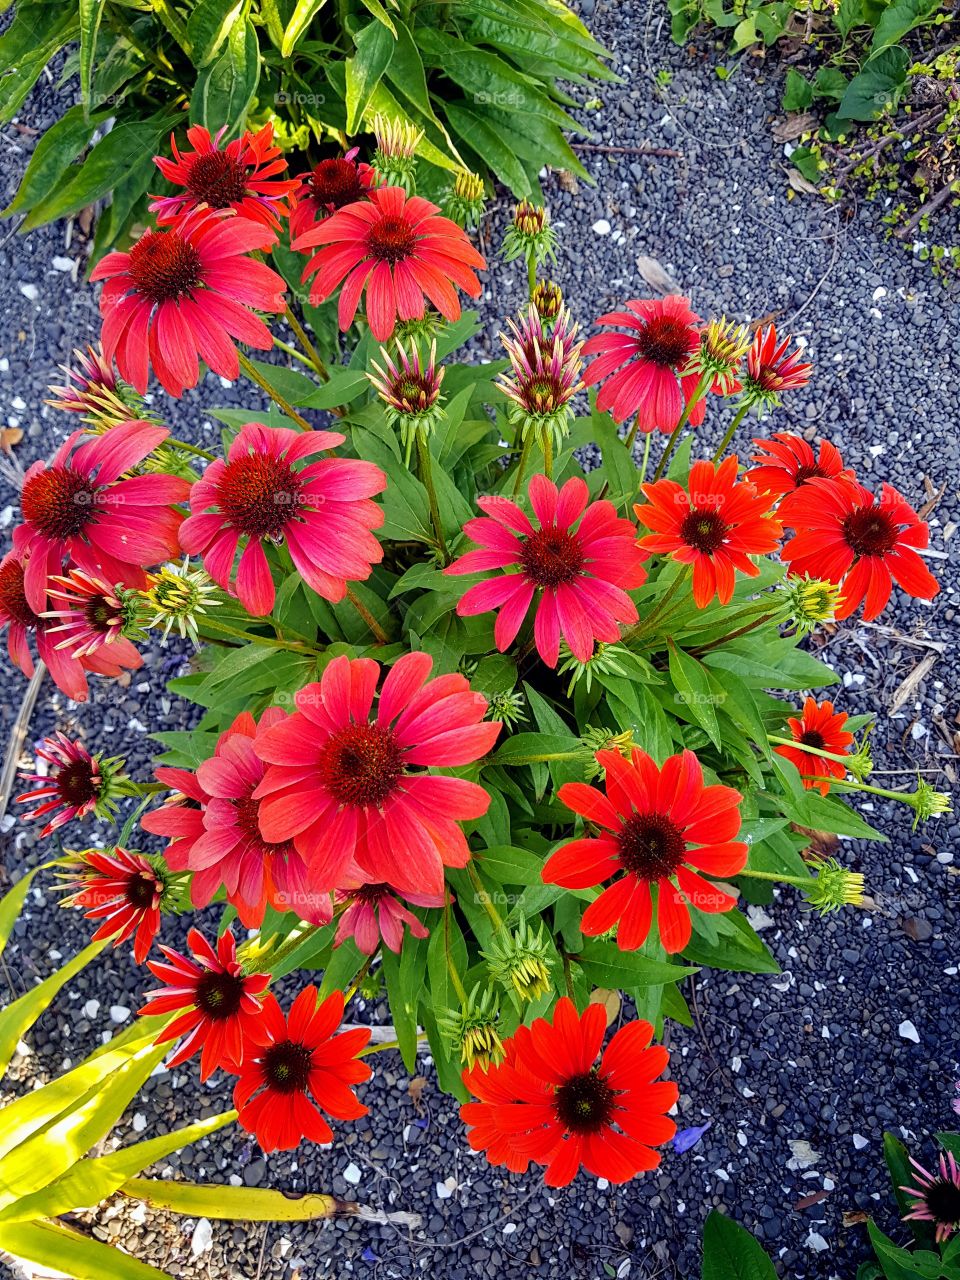 Bright red daisies stand out in the garden. I just couldn't walk past this lovely bunch.